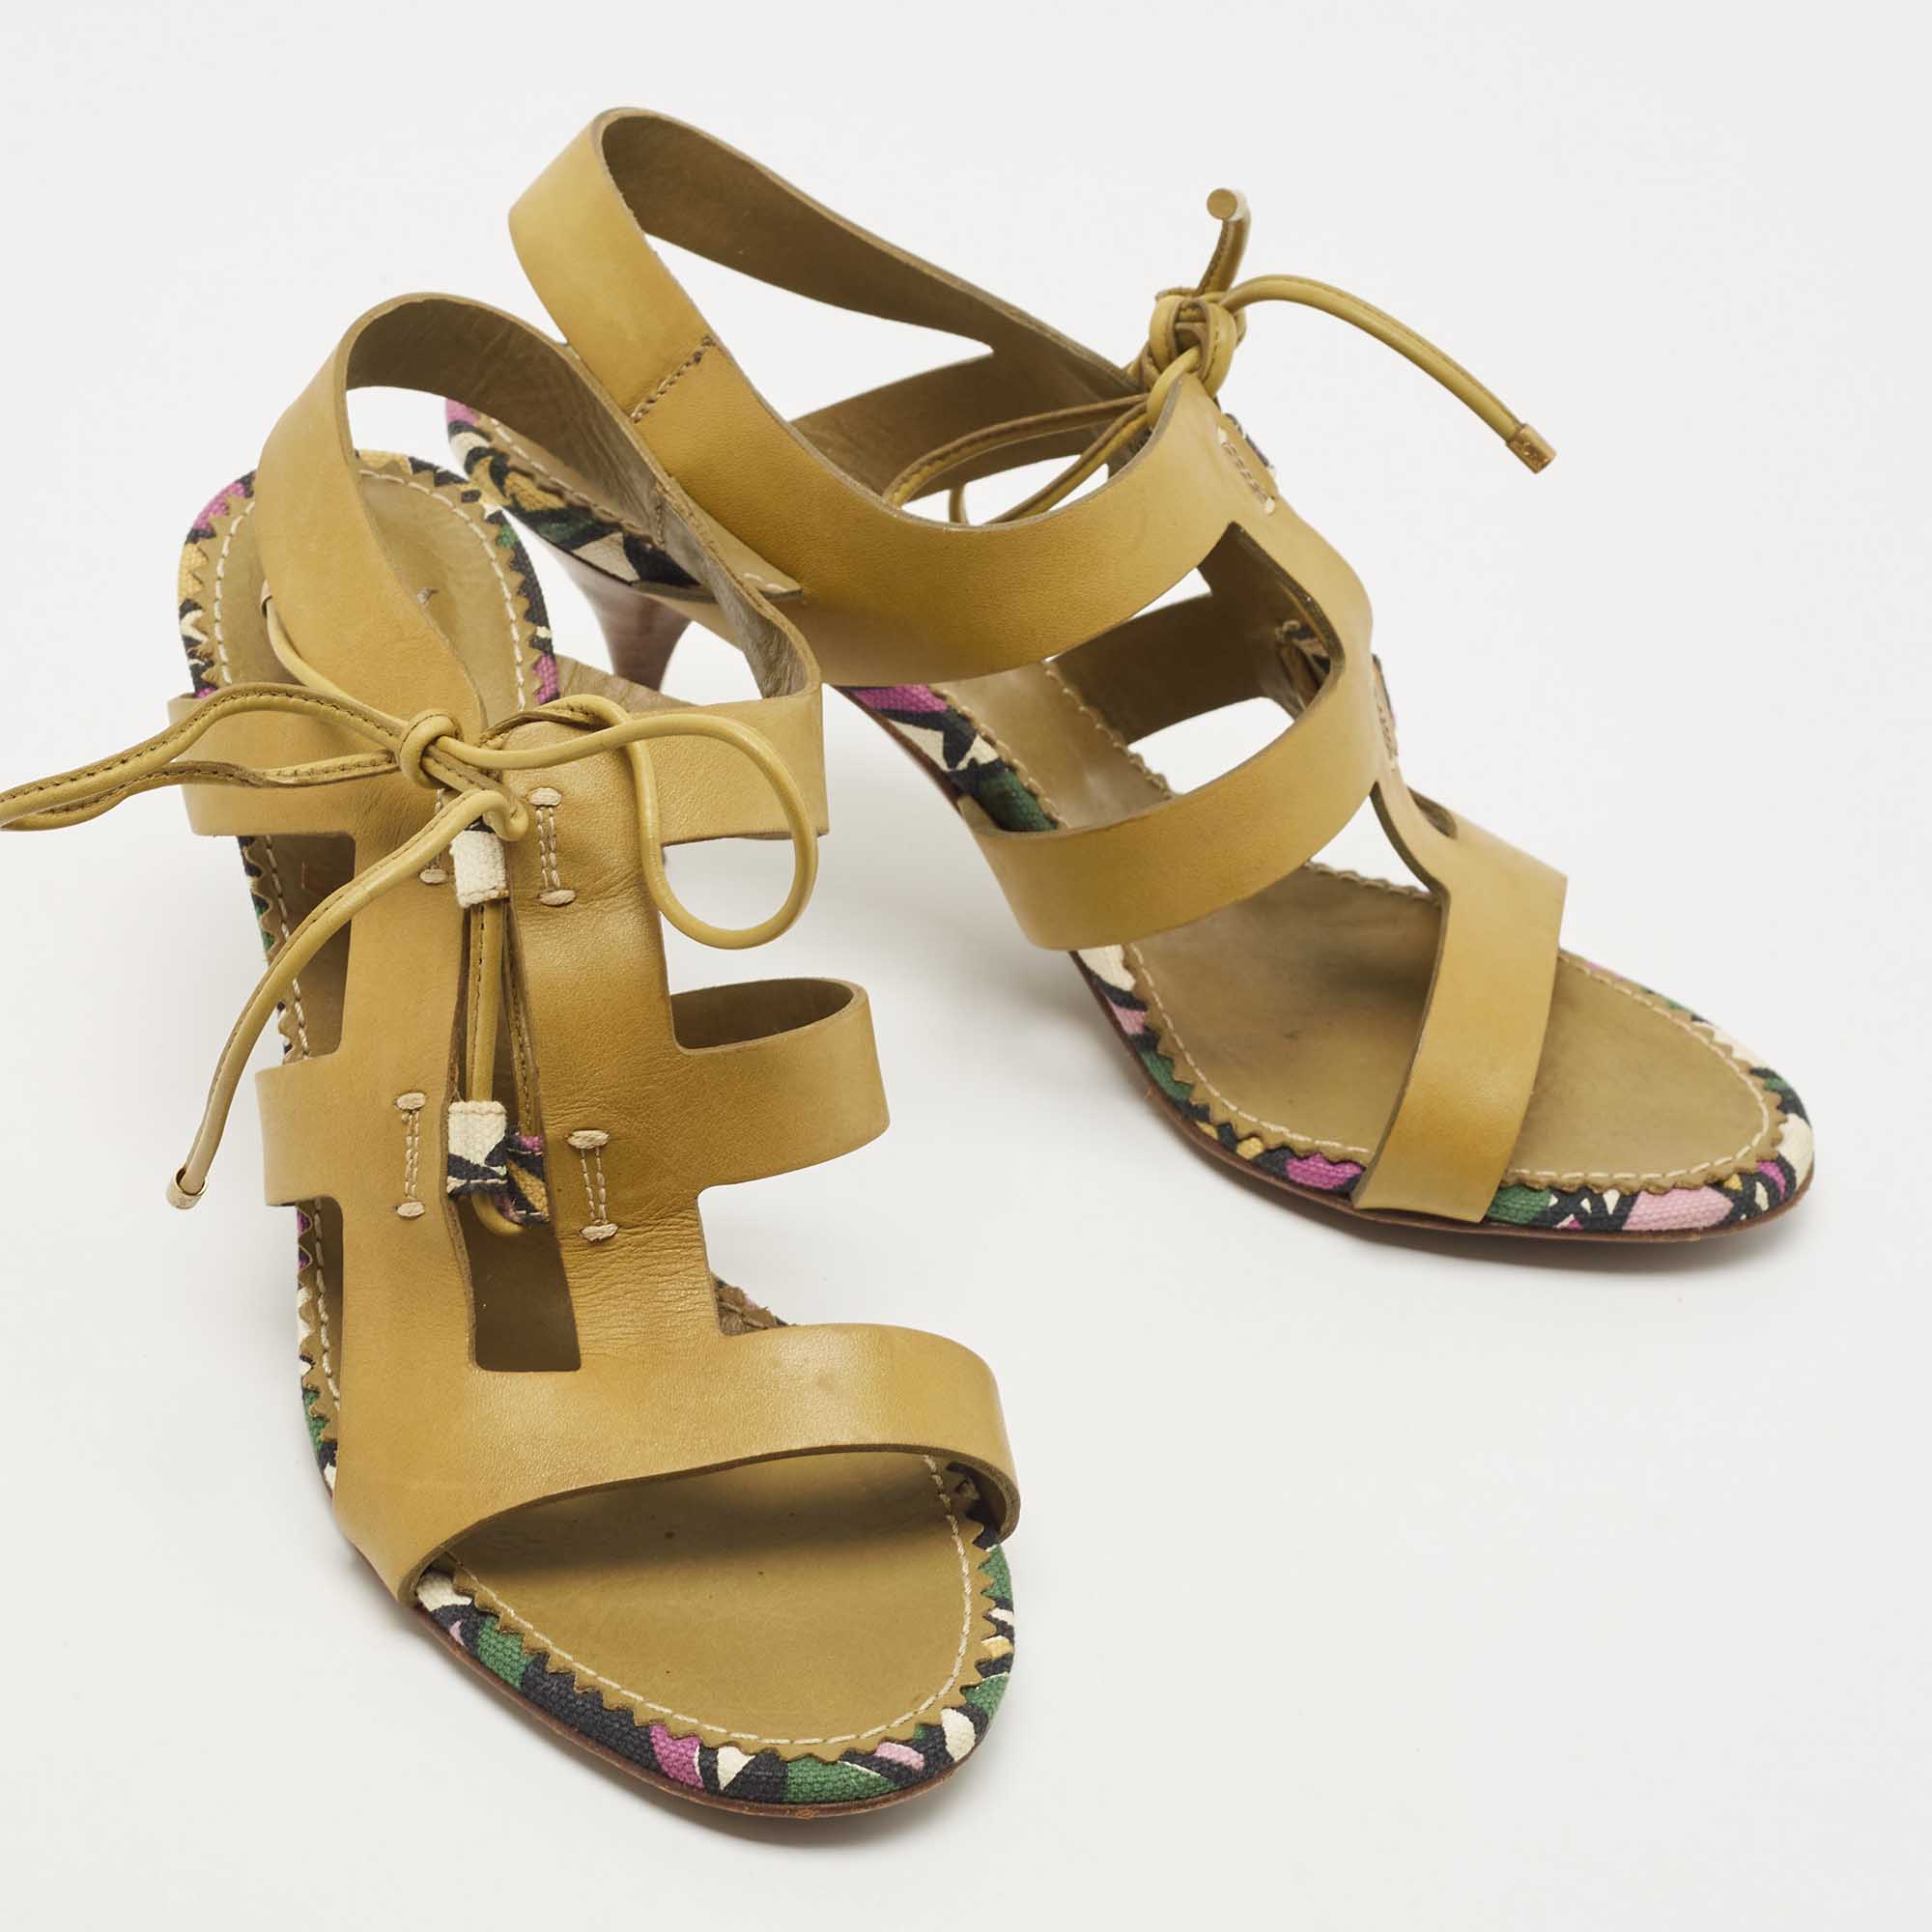 Saint Laurent Green Leather Strappy Sandals Size 35.5